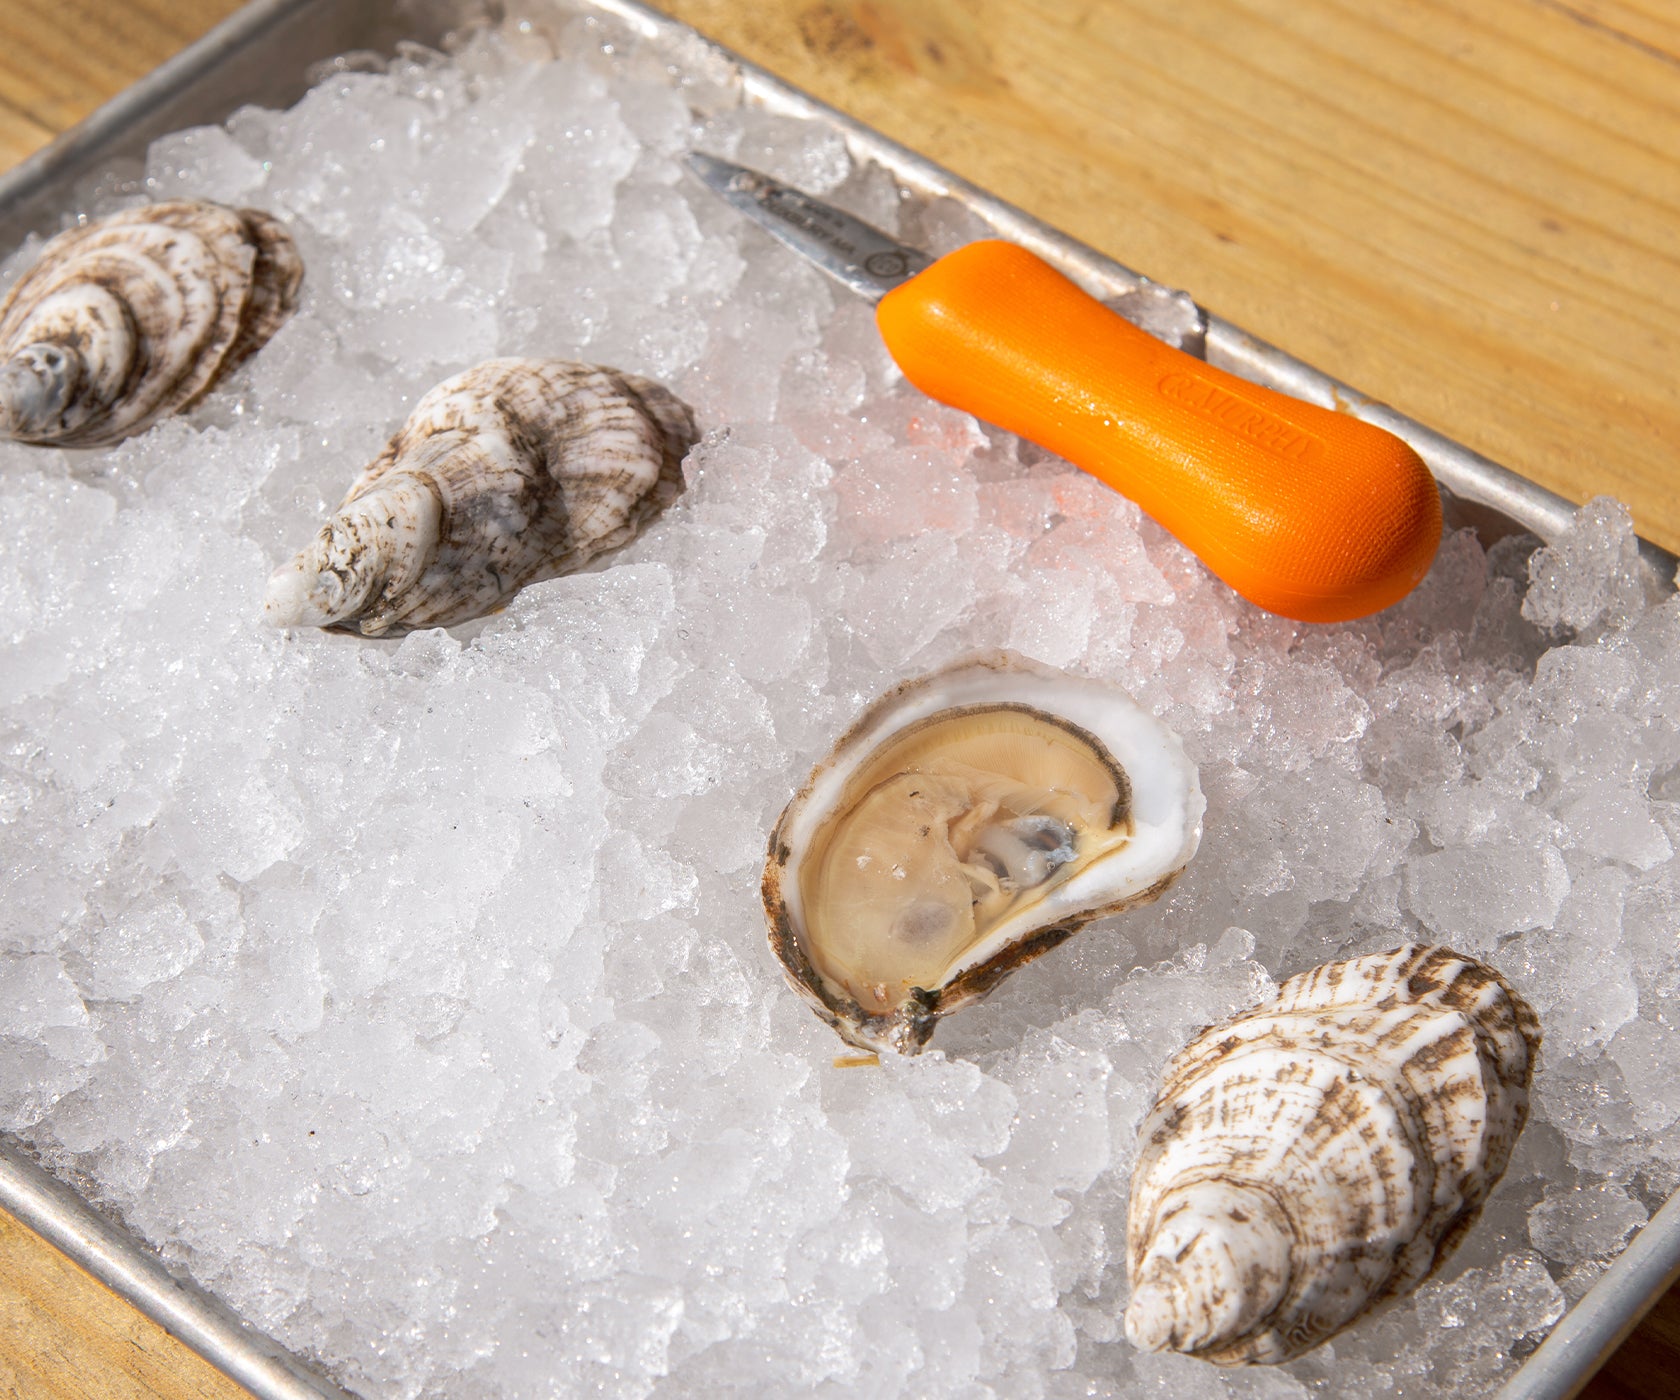 Aquidneck Cup Oysters from Portsmouth, RI